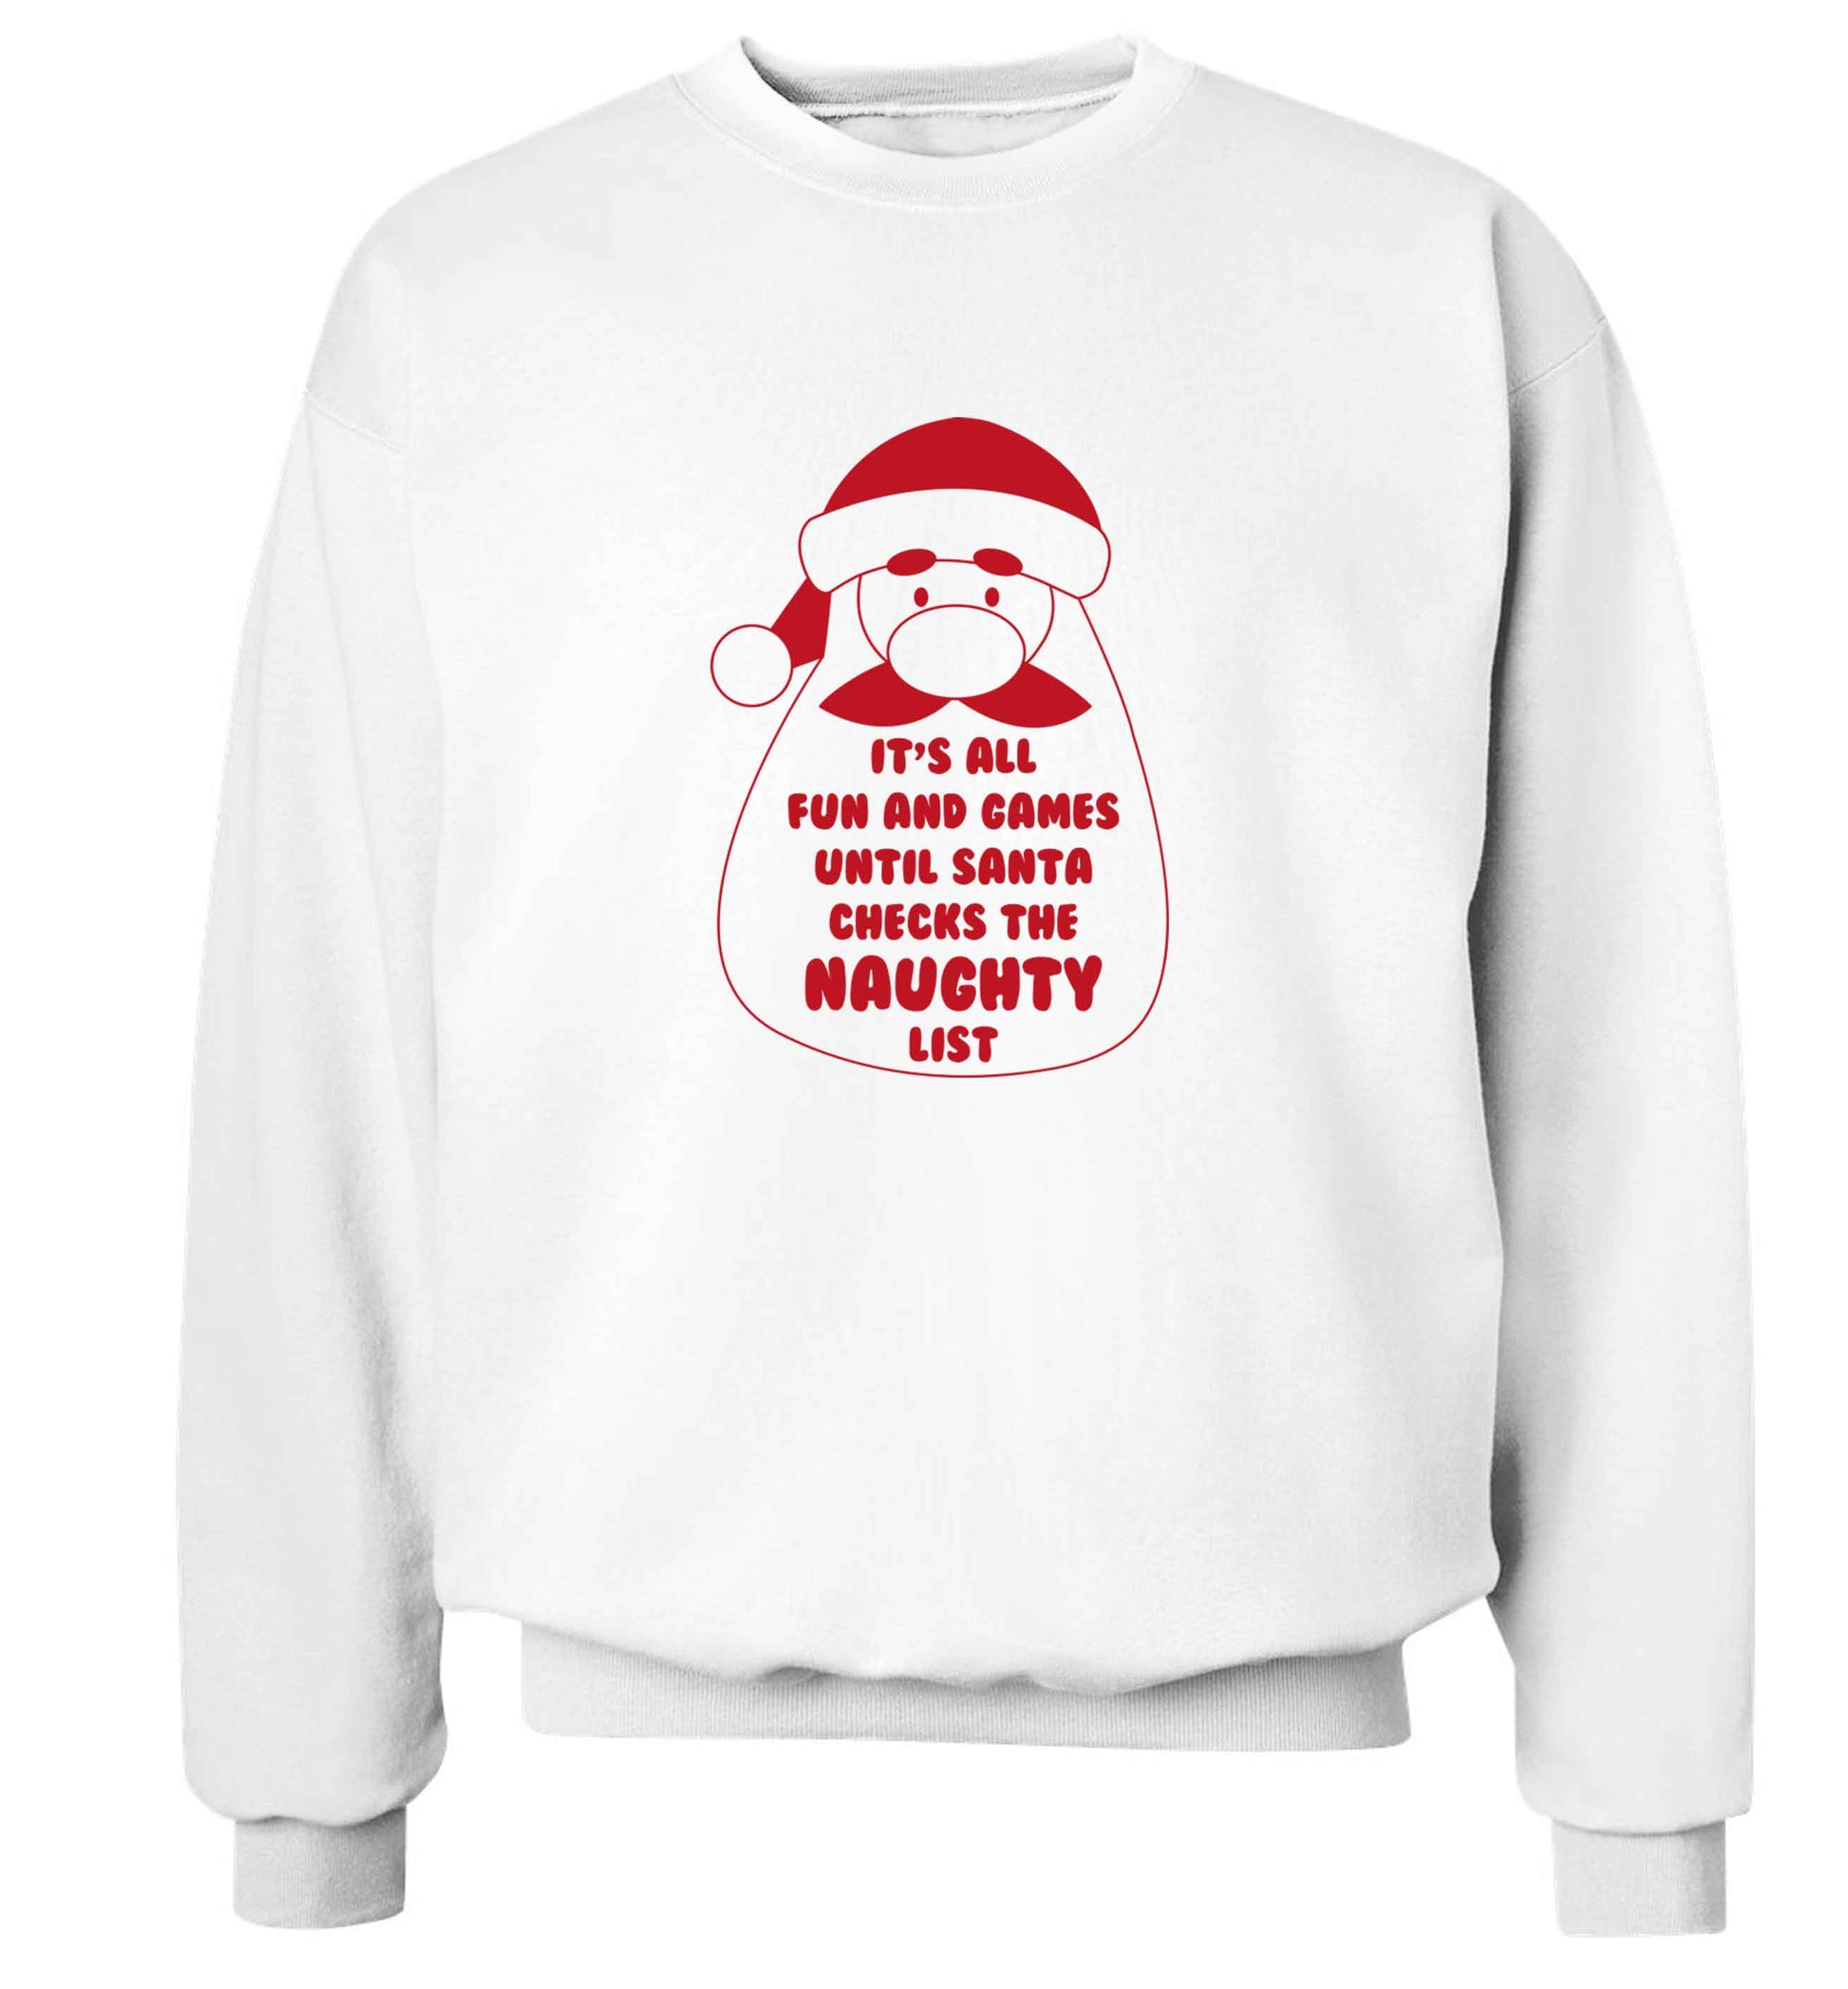 It's all fun and games until Santa checks the naughty list adult's unisex white sweater 2XL